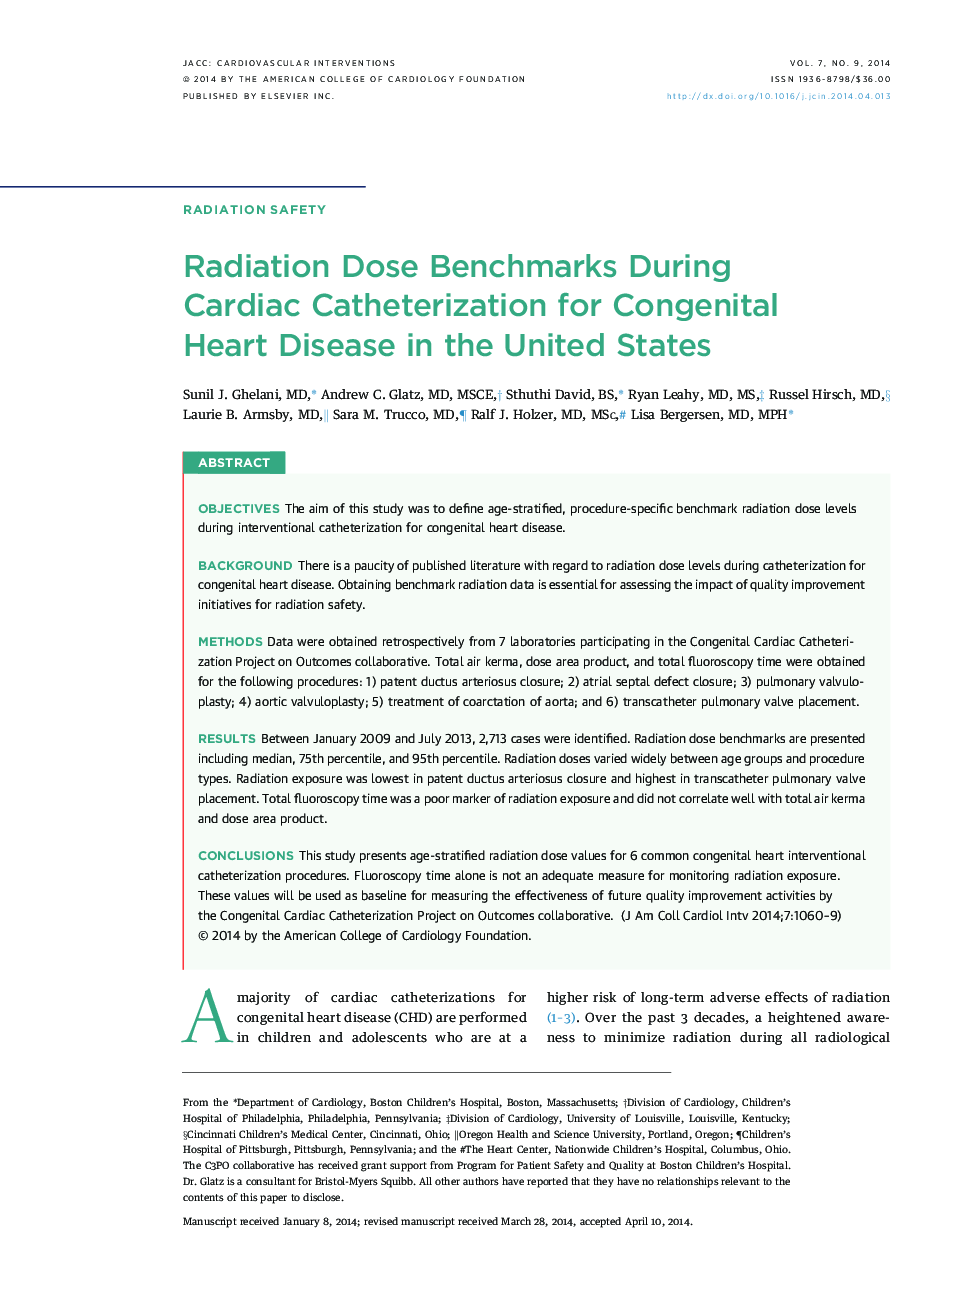 Radiation Dose Benchmarks During Cardiac Catheterization for Congenital Heart Disease in the United States 